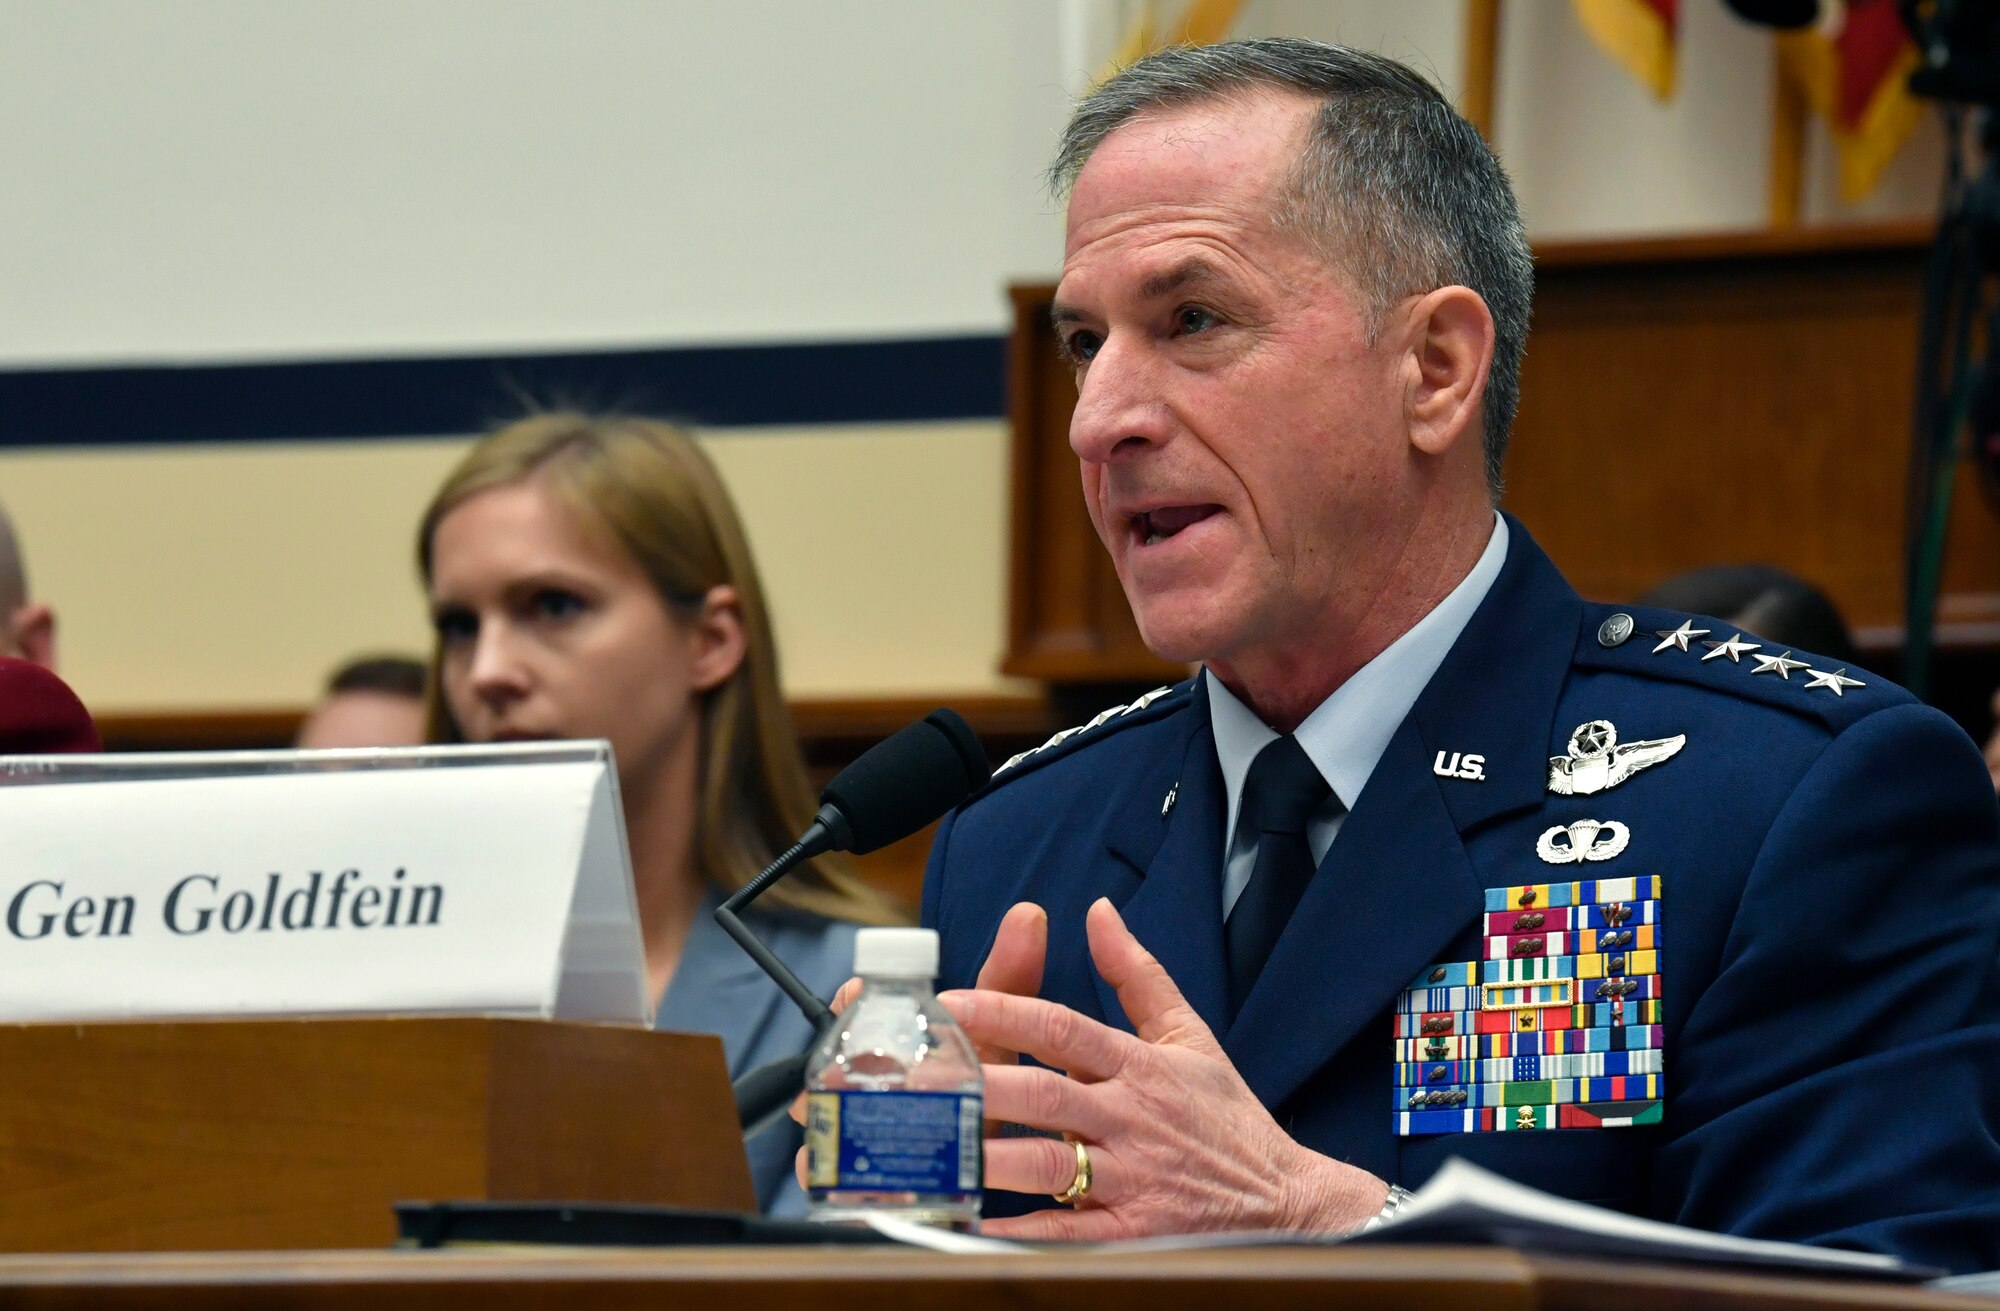 Air Force Chief of Staff Gen. David L. Goldfein testifies during a House Armed Services Committee hearing in Washington D.C., April 2, 2019. The committee convened to discuss fiscal year 2020 budget requests with the Air Force and Army senior leaders. (U.S. Air Force Photo by Wayne Clark)